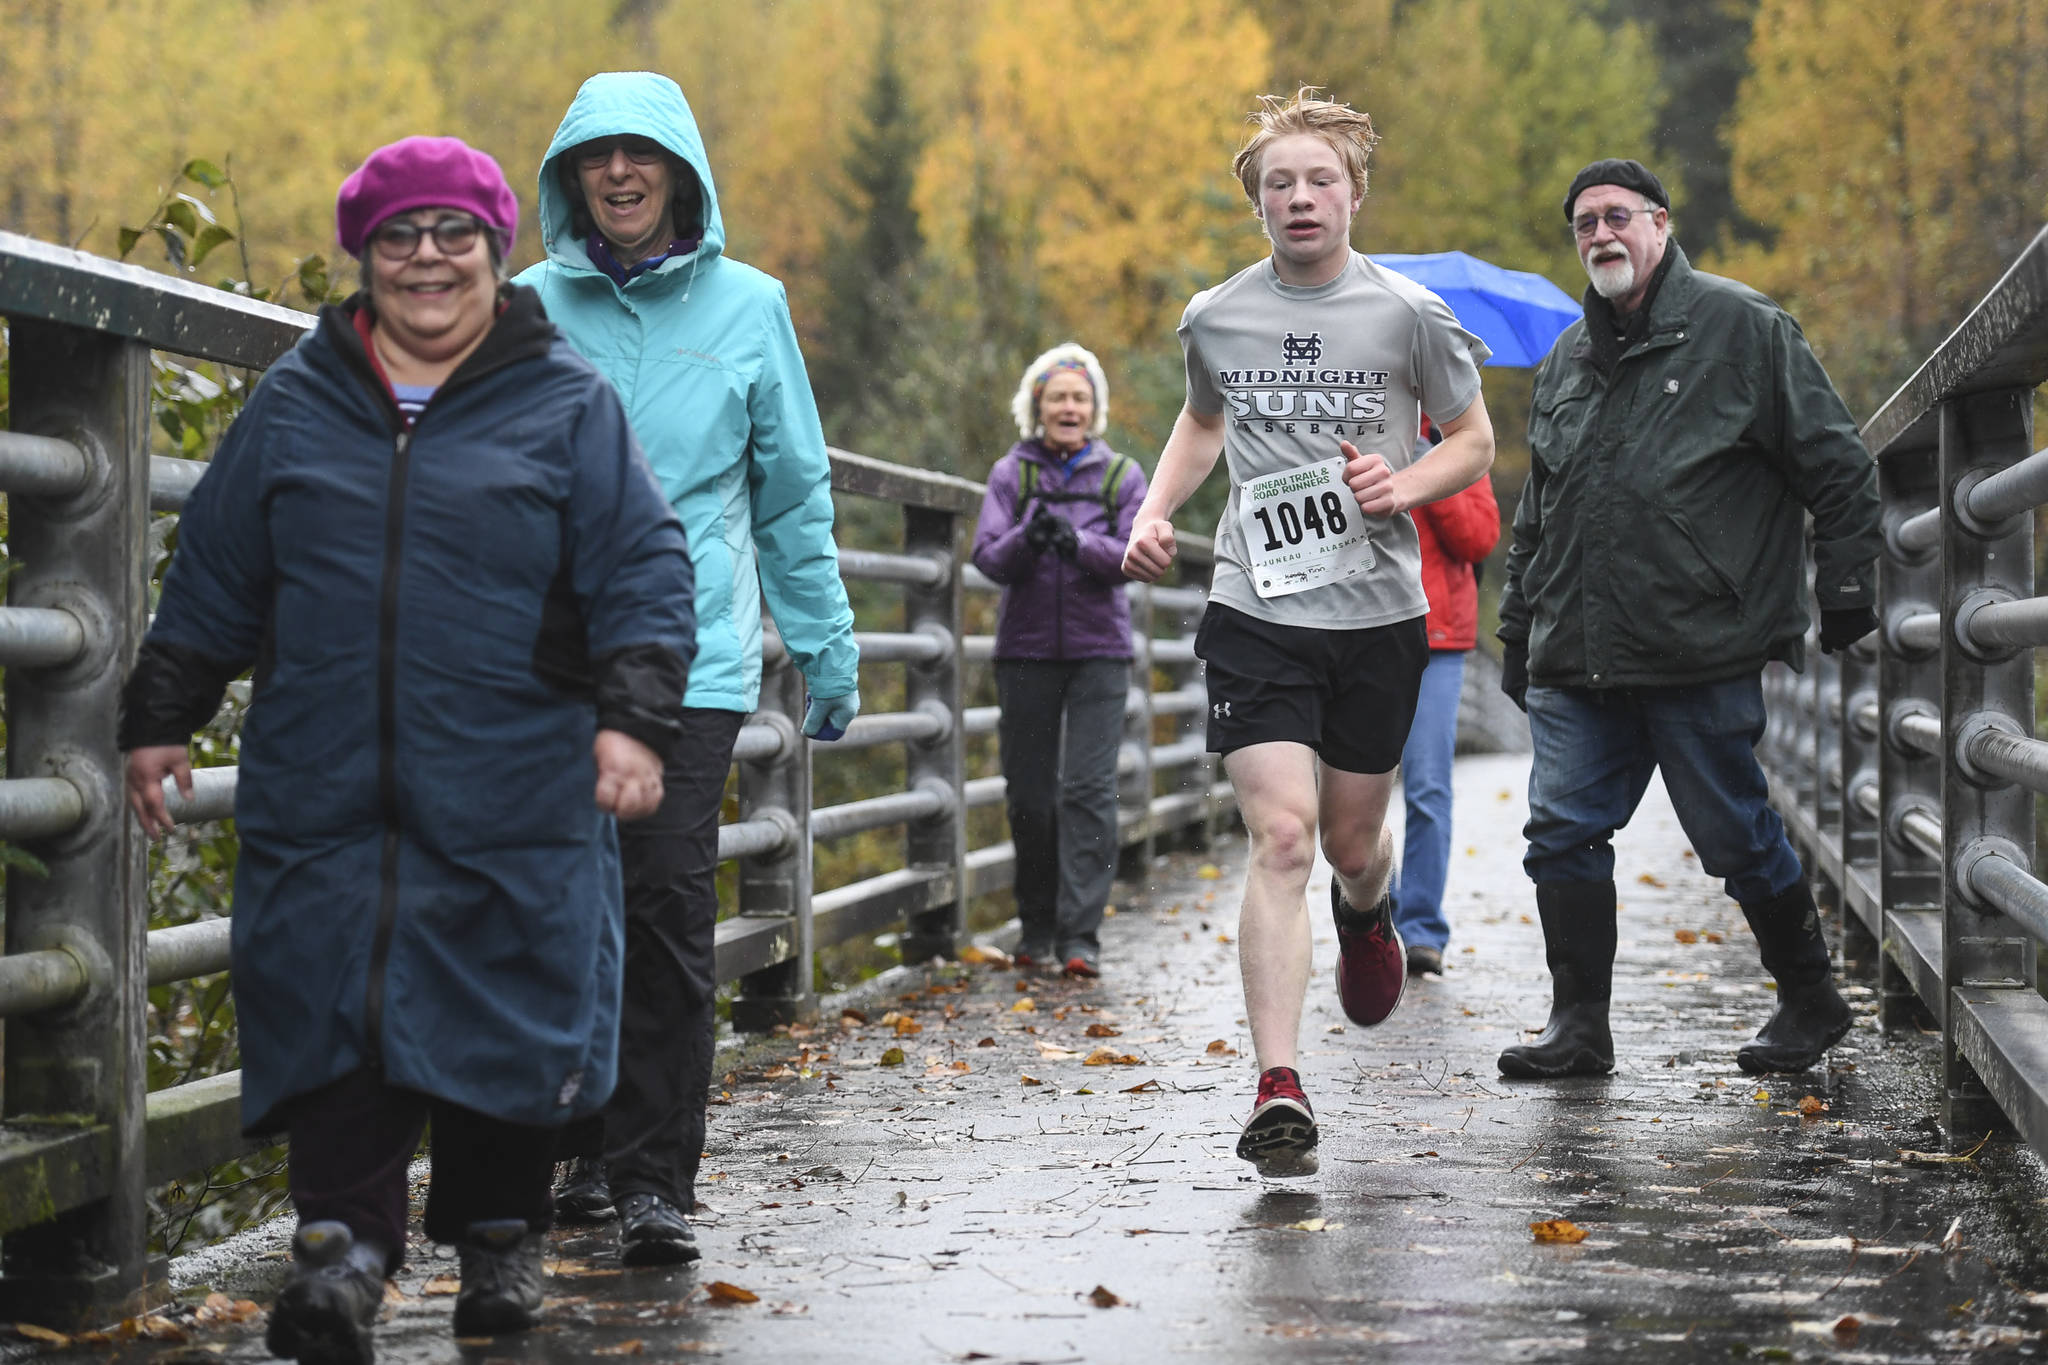 Finn Kesey runs in the annual community mental health run, the Extra Tough 5K & 1 Mile Run, on Saturday, Oct. 12, 2019, at Riverbend Elementary School. The run is sponsored by National Alliance on Mental Illness (NAMI) Juneau. (Michael Penn | Juneau Empire)